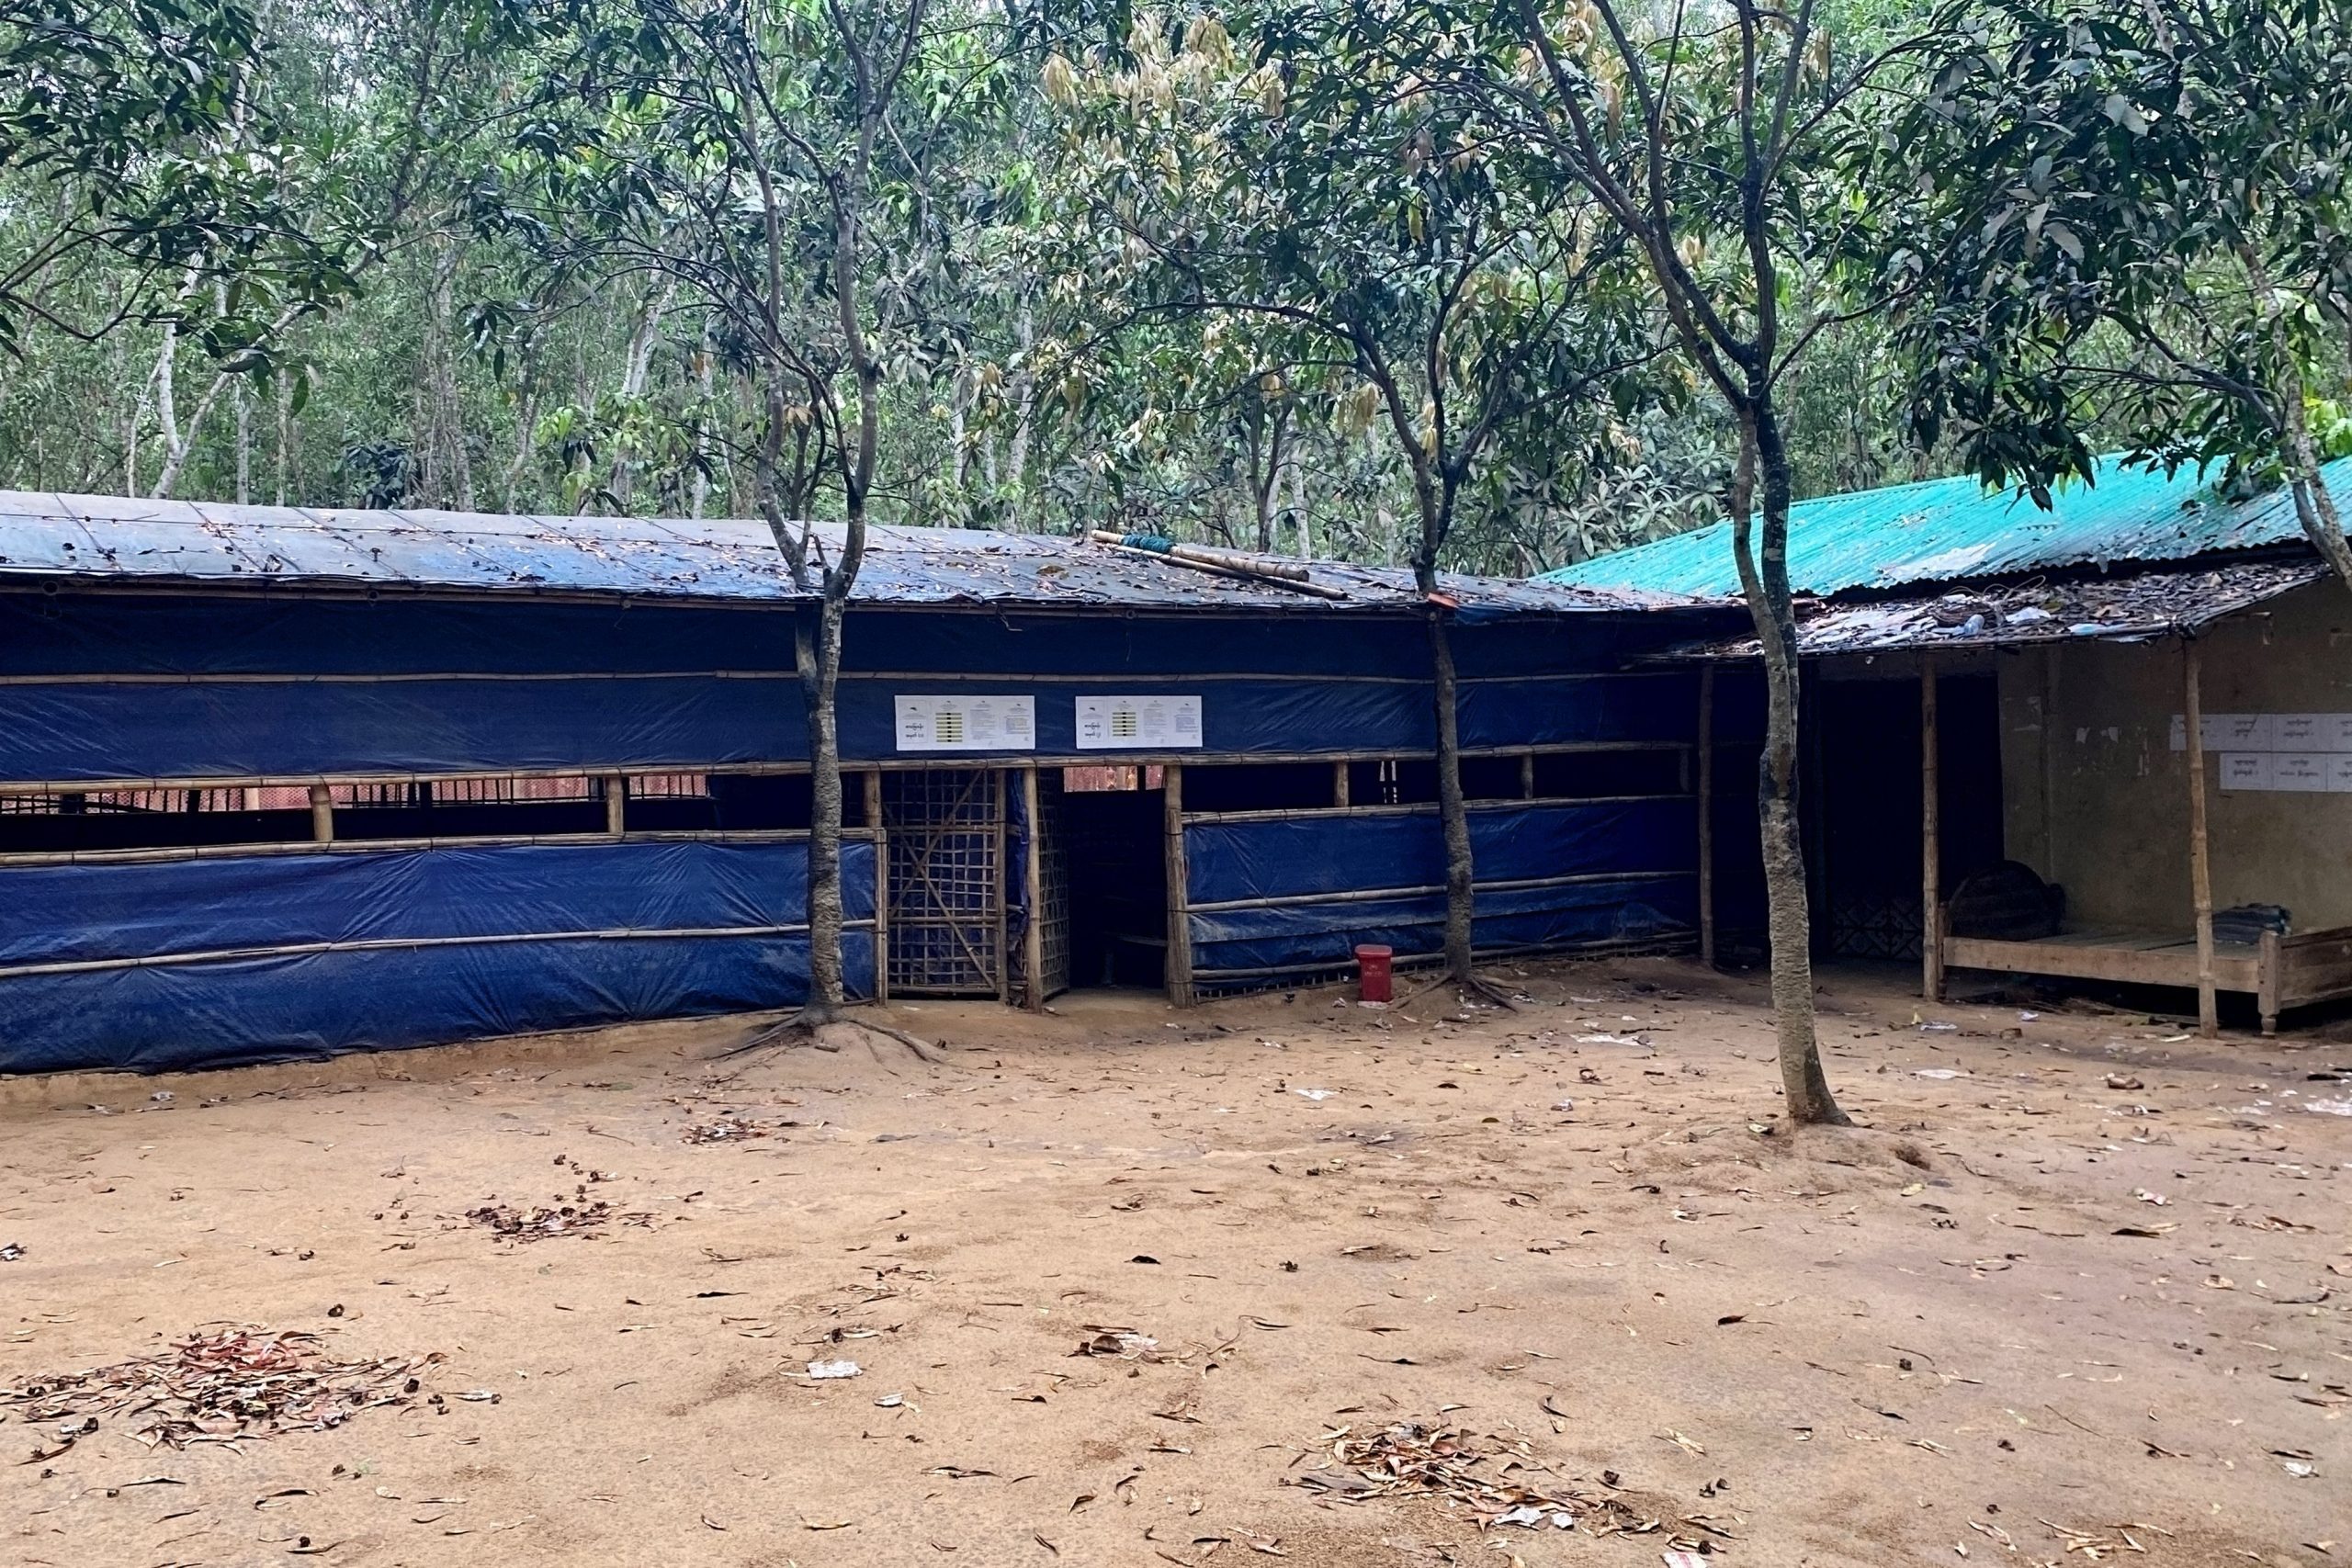 Bangladesh shuts largest private school in Rohingya camps